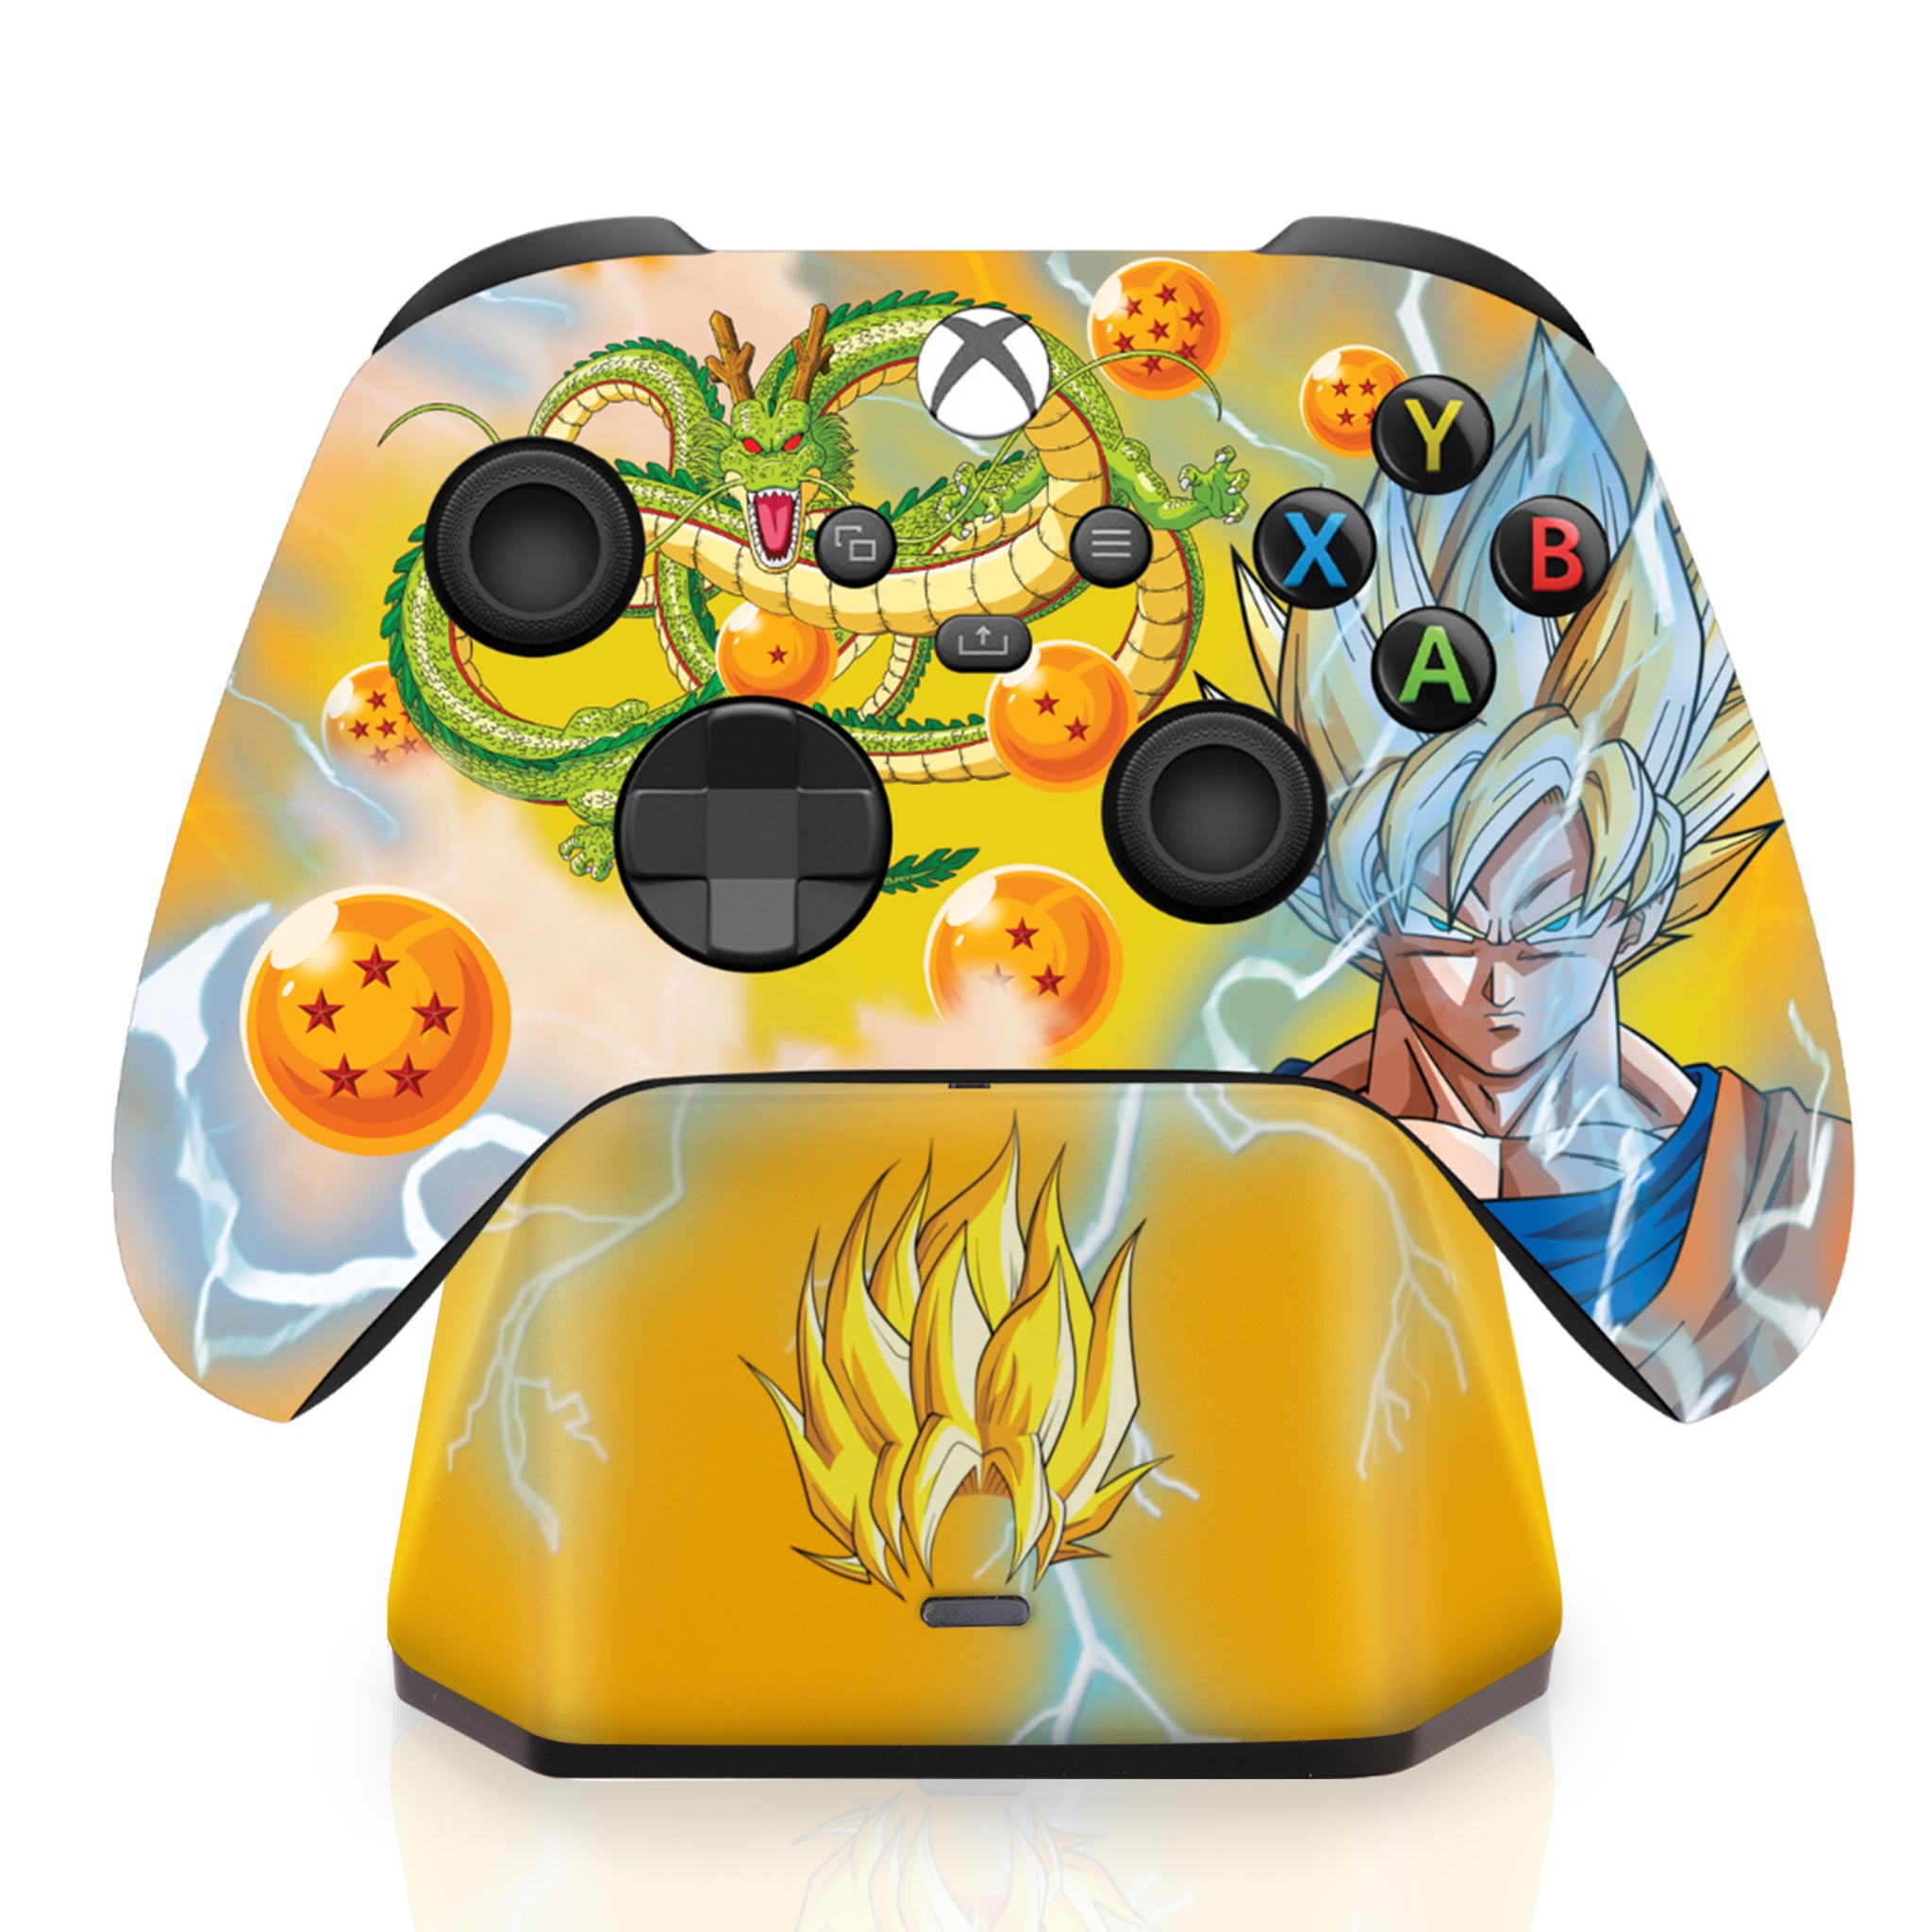 DBZ Goku & Shenron Xbox Series X Controller with Charging Station